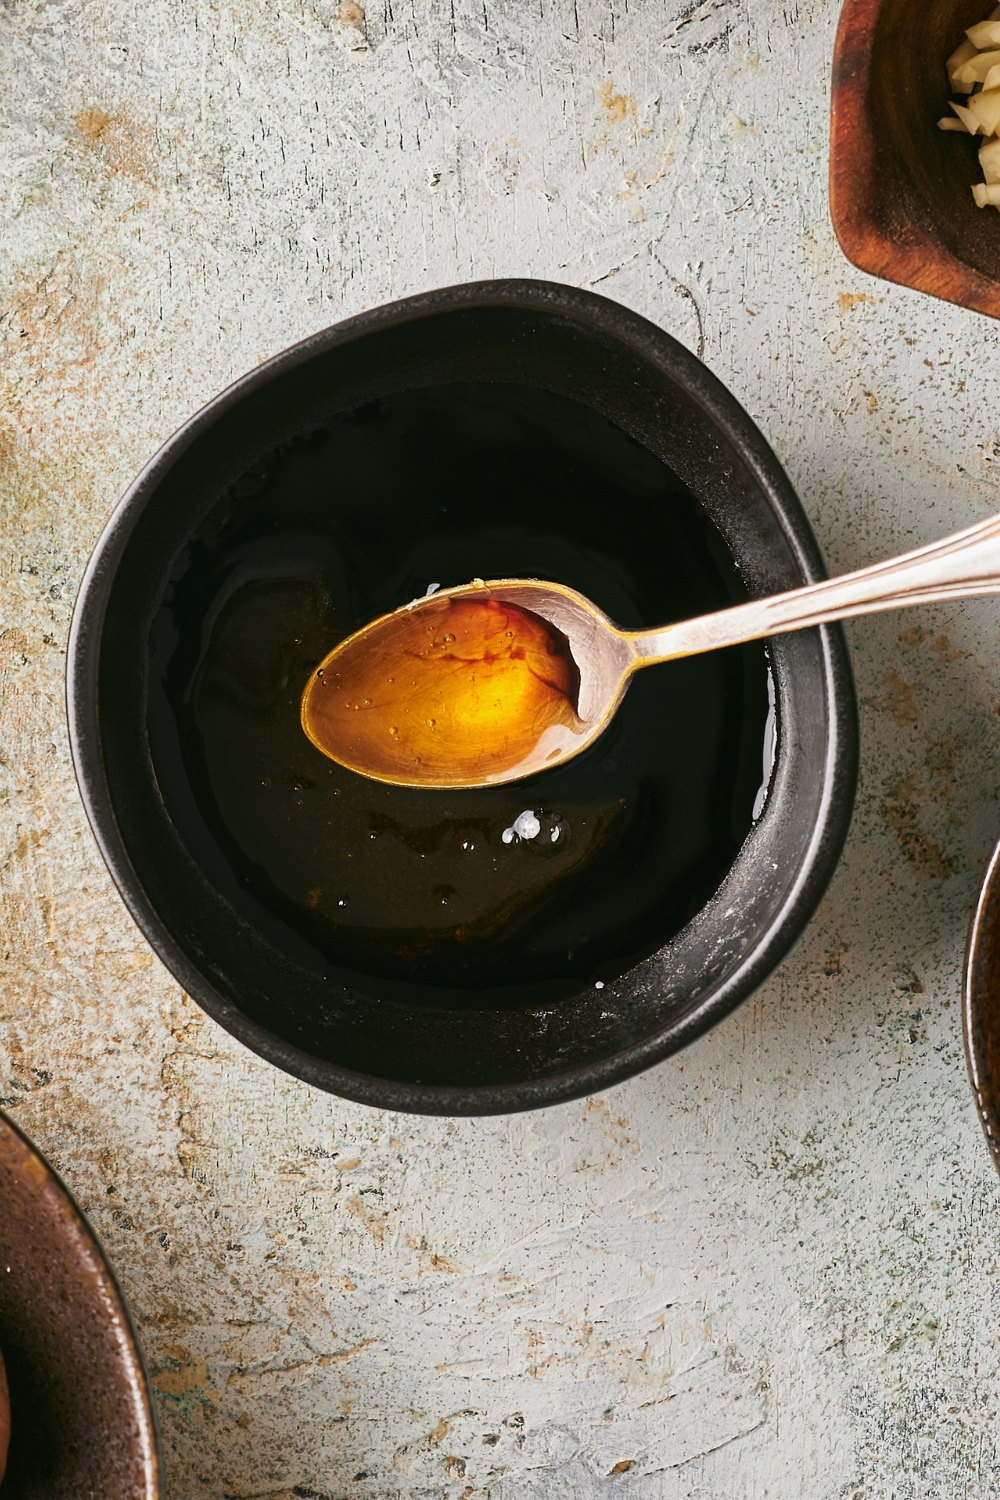 A spoon with a honey sauce on it above a bowl filled with the sauce.